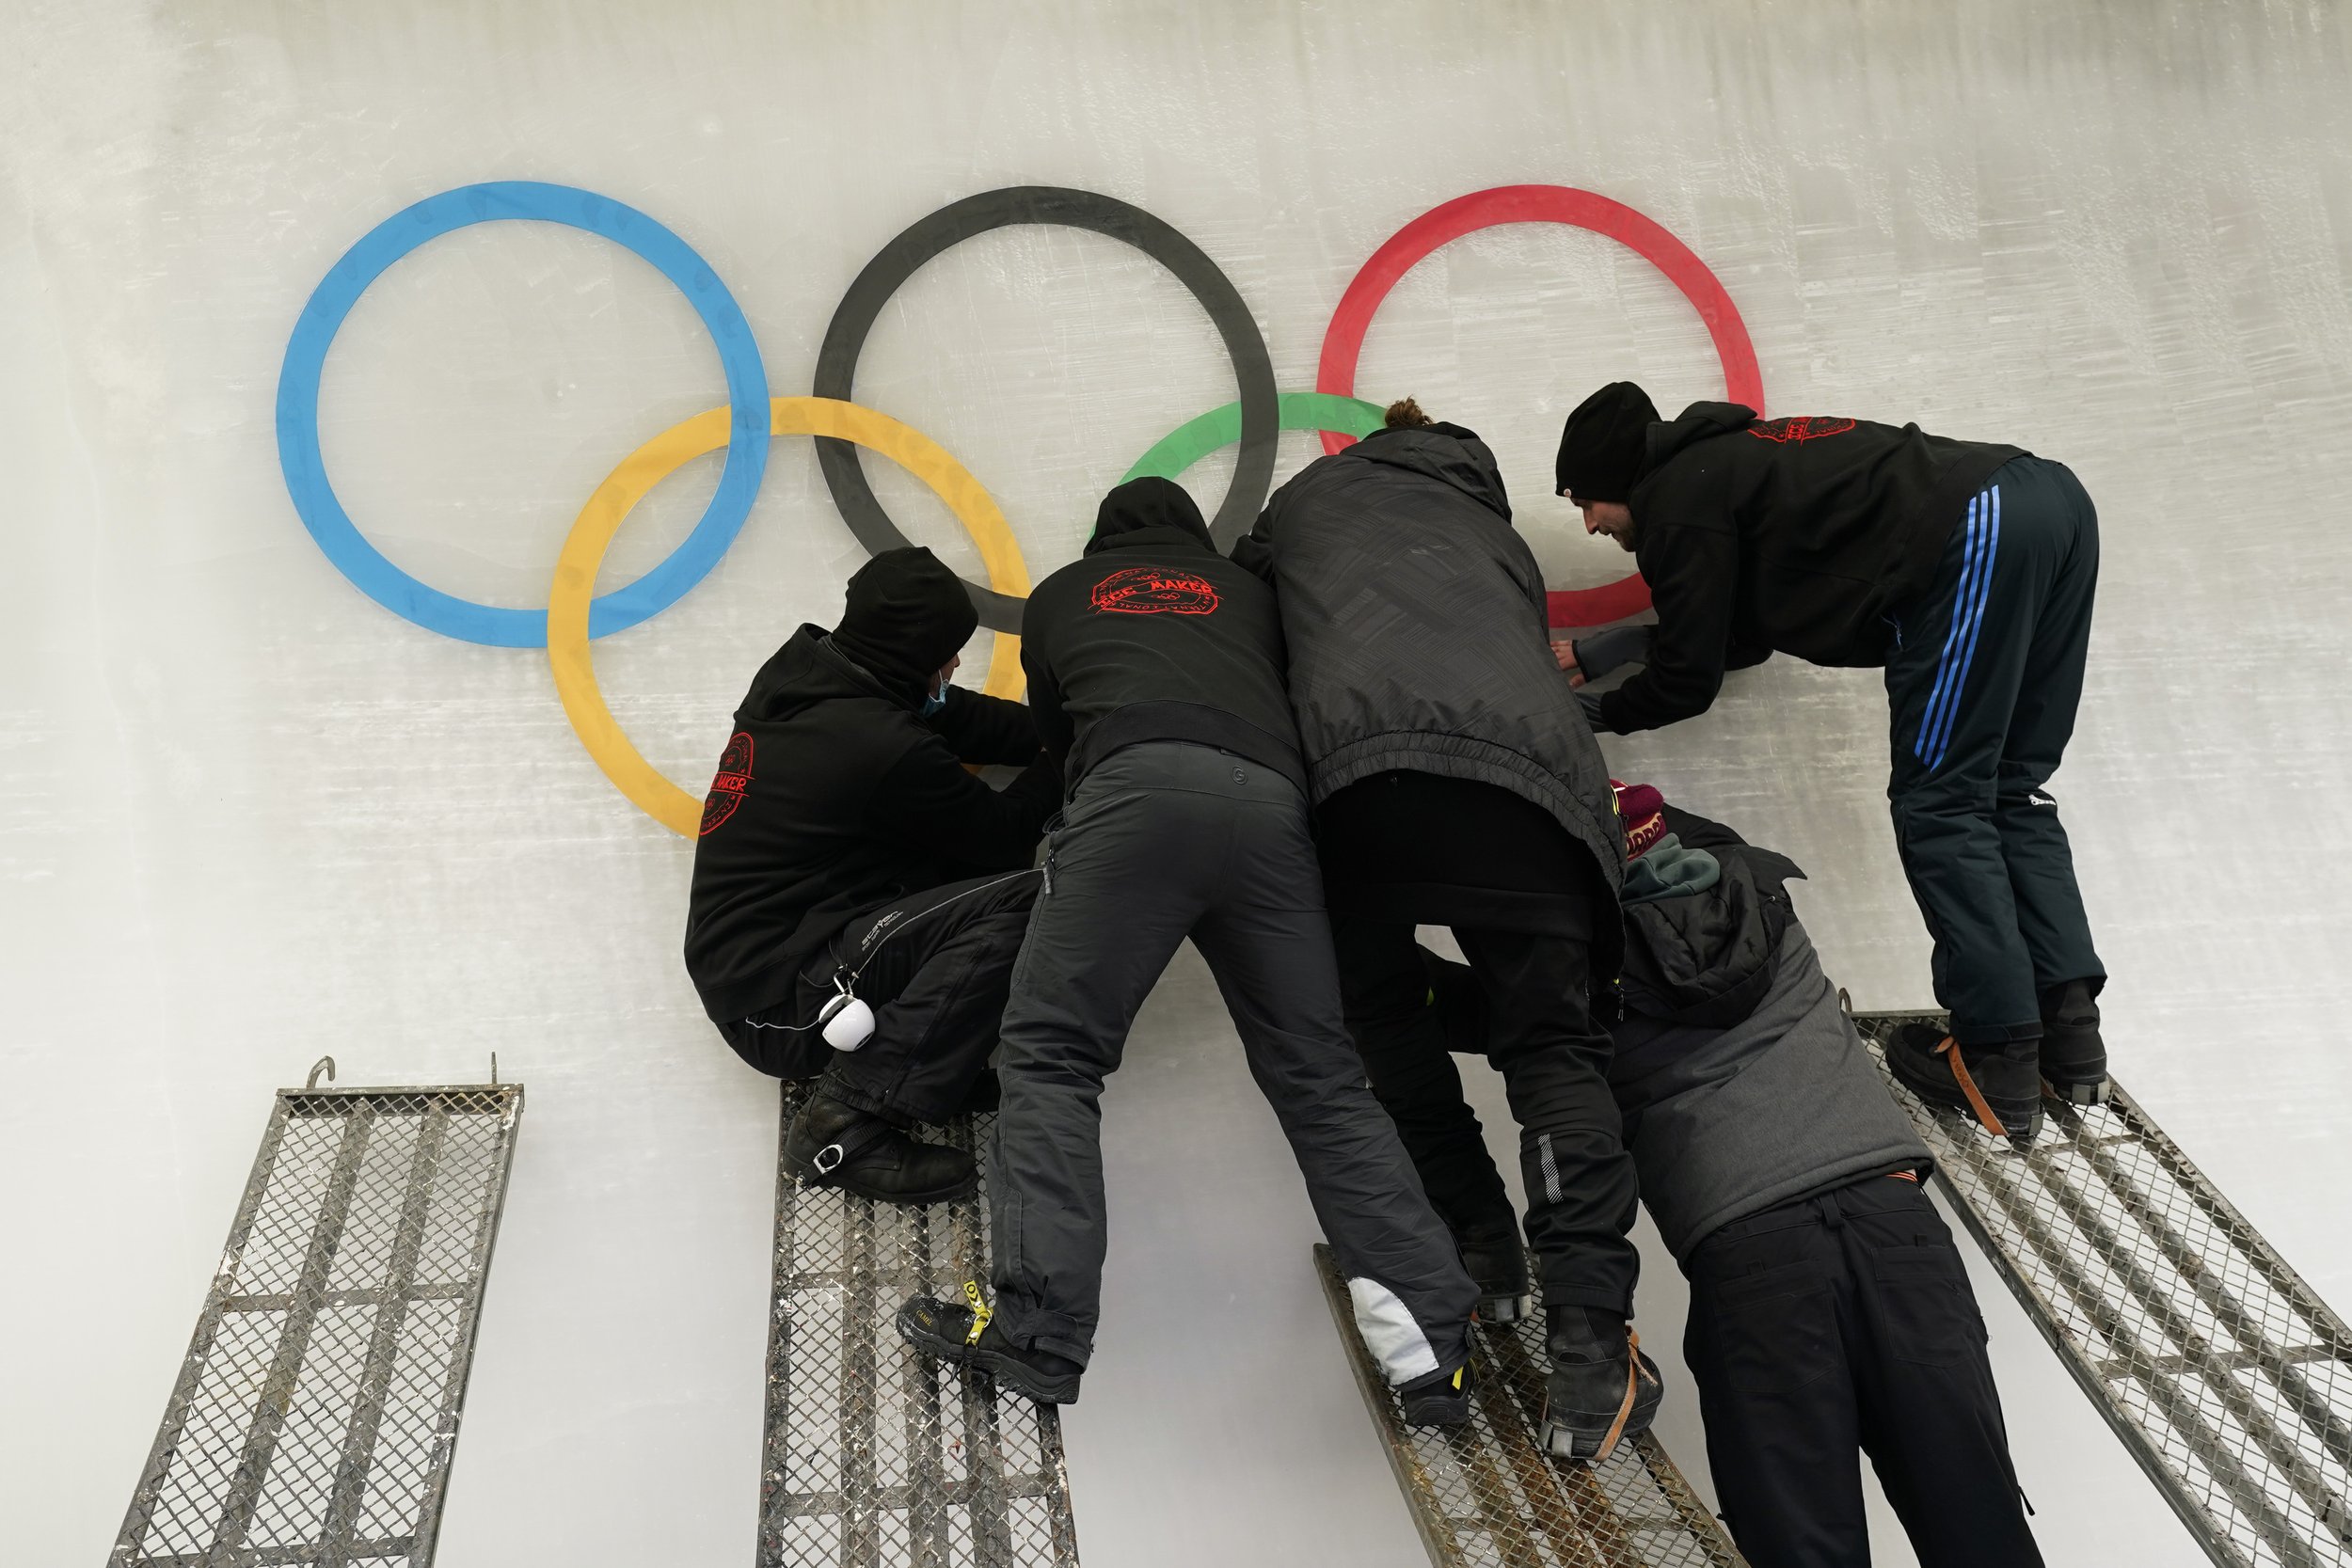  Ice makers apply a cutout of the Olympic rings onto the track at the Yanqing National Sliding Center ahead of the 2022 Winter Olympics, Friday, Jan. 28, 2022, in the Yanqing district of Beijing. (AP Photo/Jae C. Hong) 